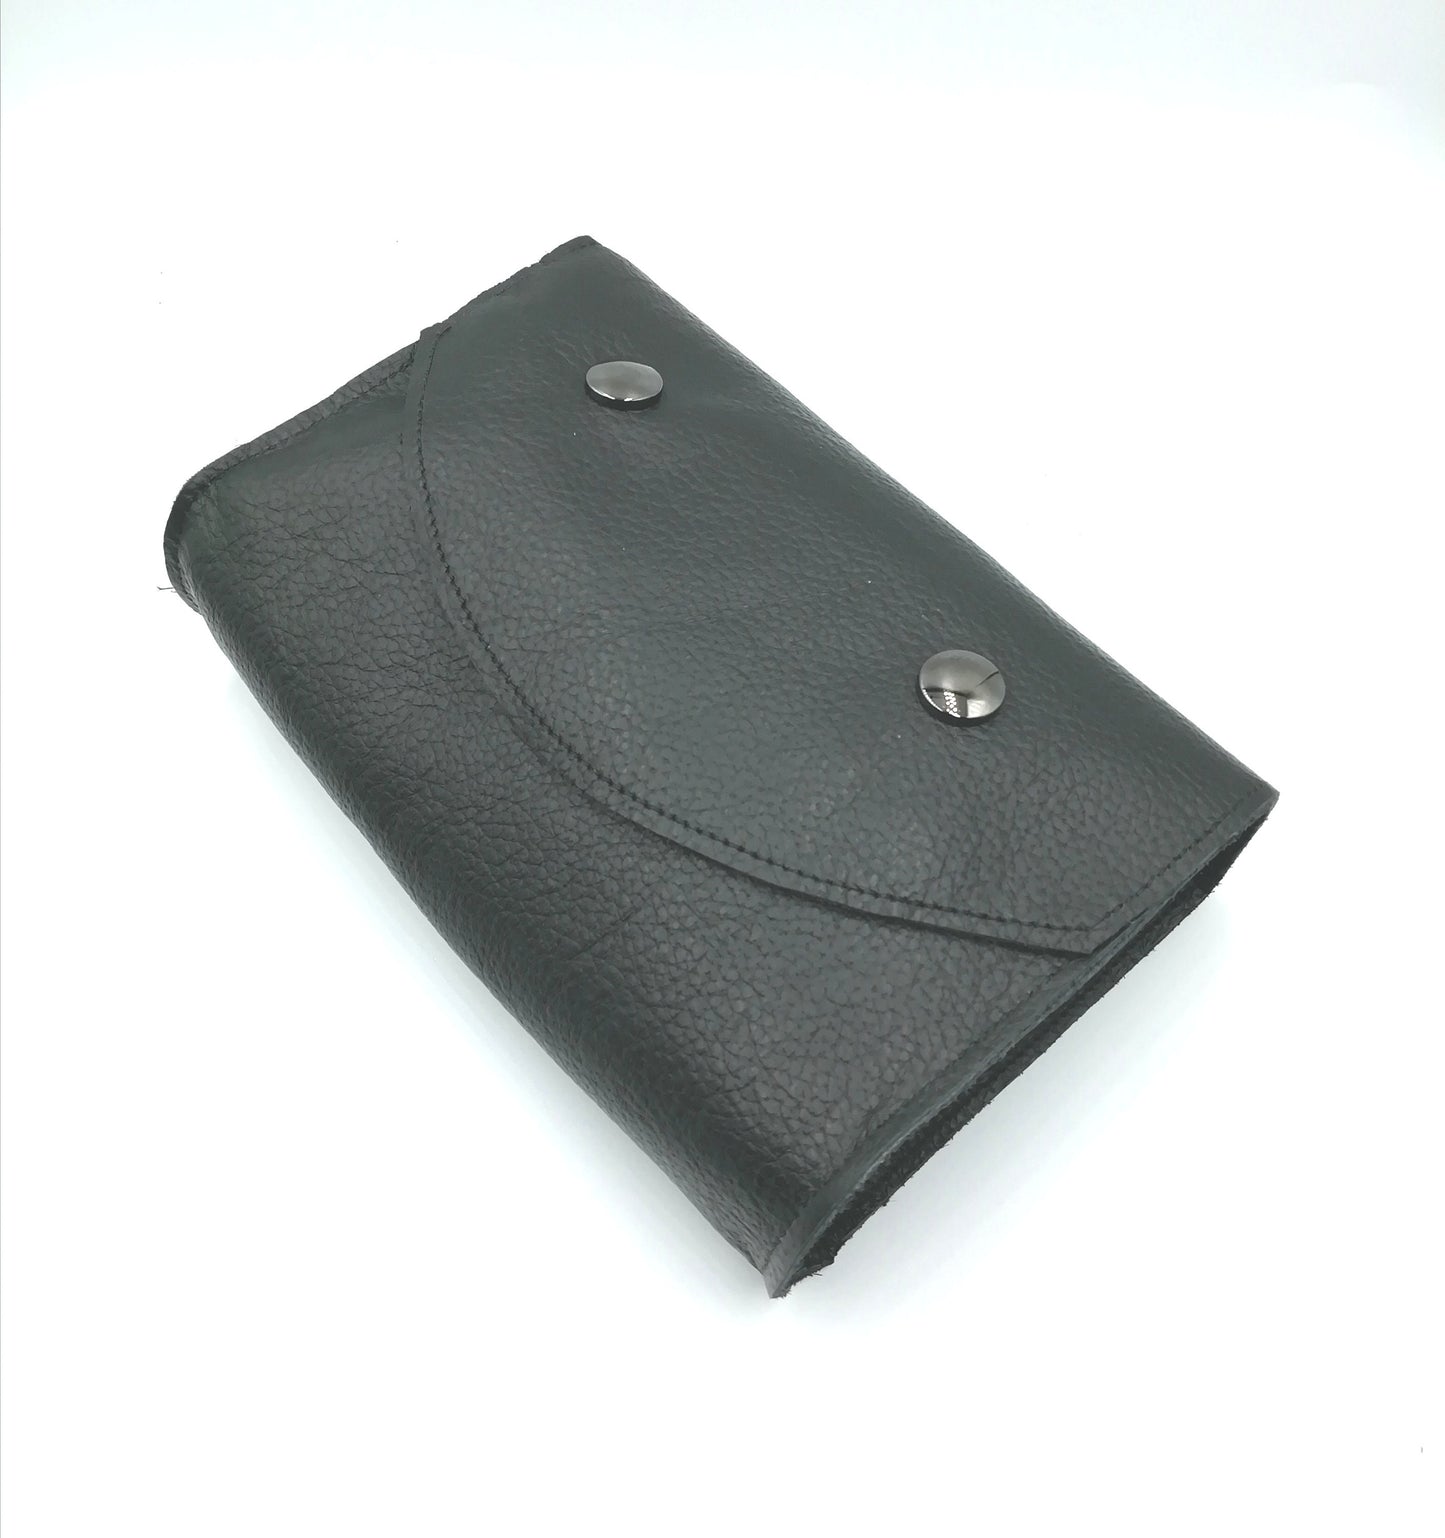 Custom leather missal/book pouch, leather book bag, leather cover pouch, Custom Pouch